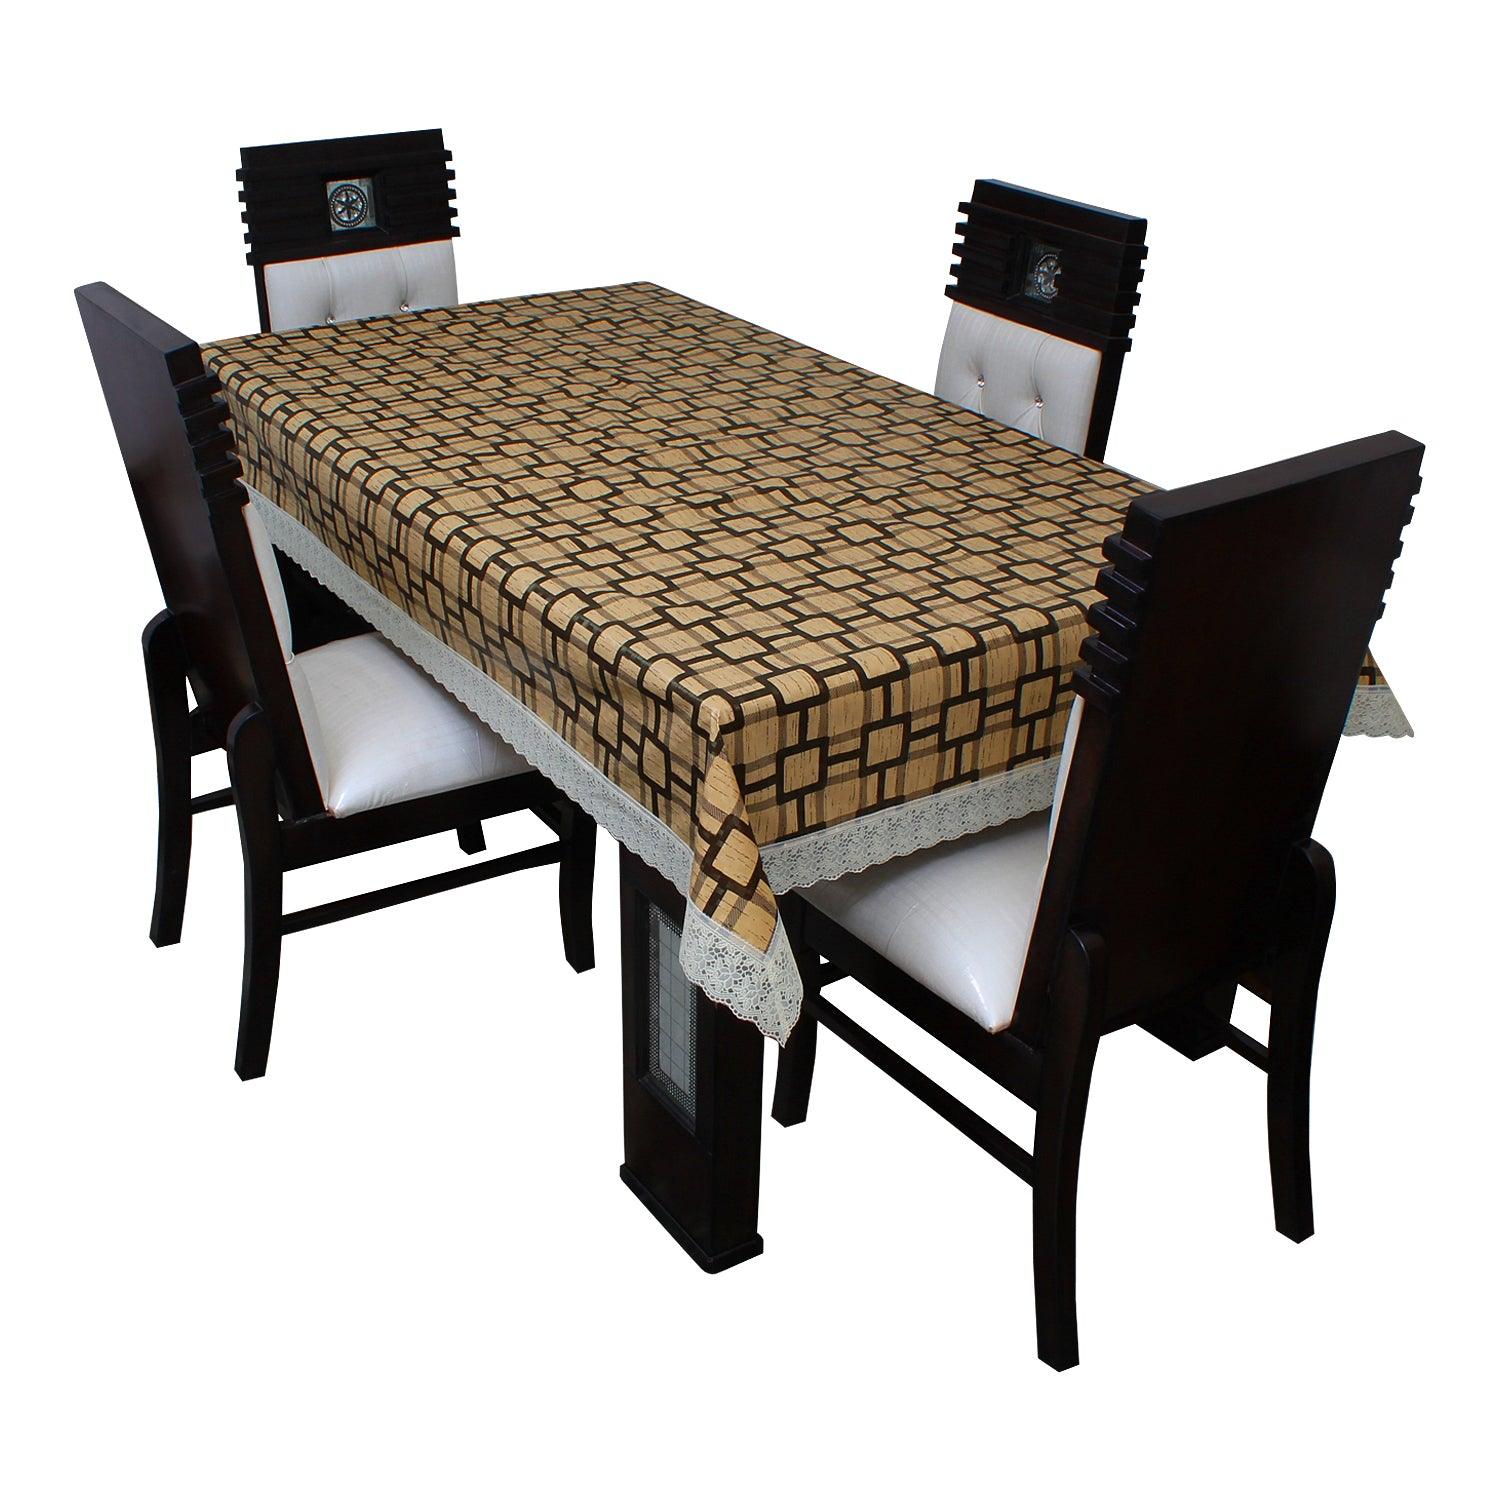 Waterproof and Dustproof Dining Table Cover, SA12 - Dream Care Furnishings Private Limited